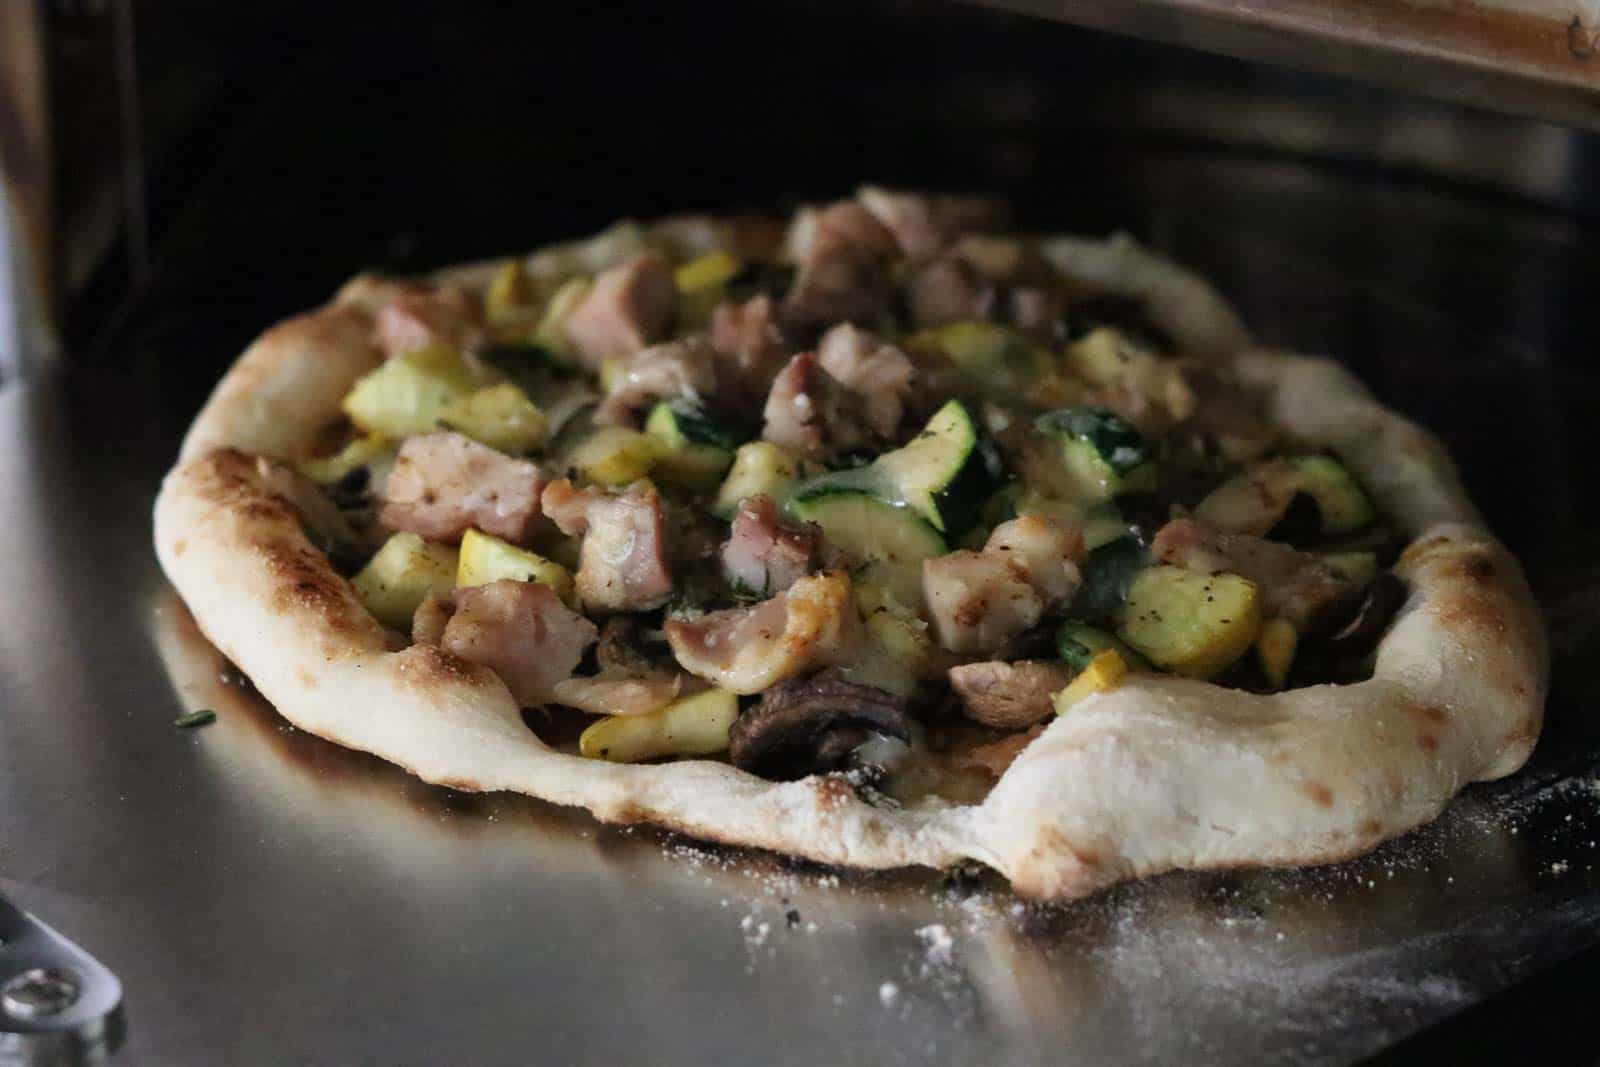 Healthy Wild Mushroom Pizza with Caramelized Onions, Garlic, Zucchini and Truffle Oil Pizza on a stainless steel pizza peel in oven